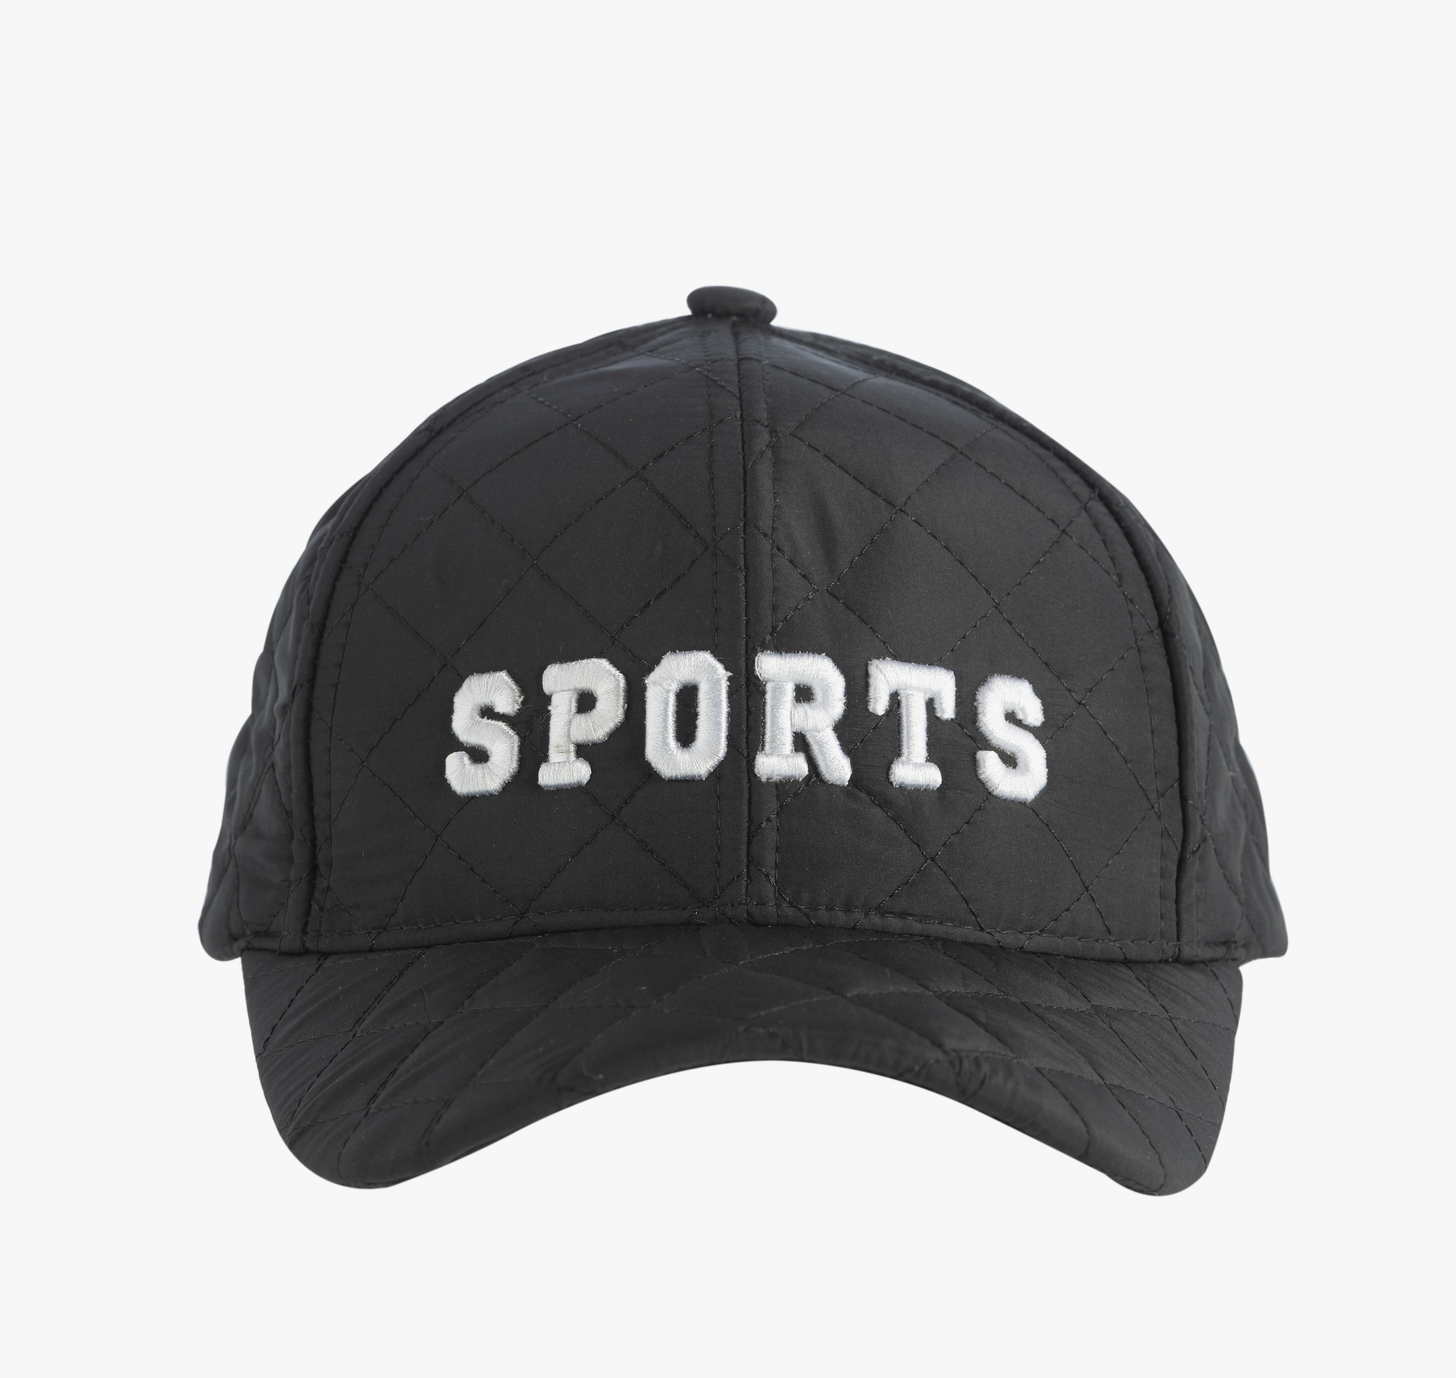 Go Sports Hat